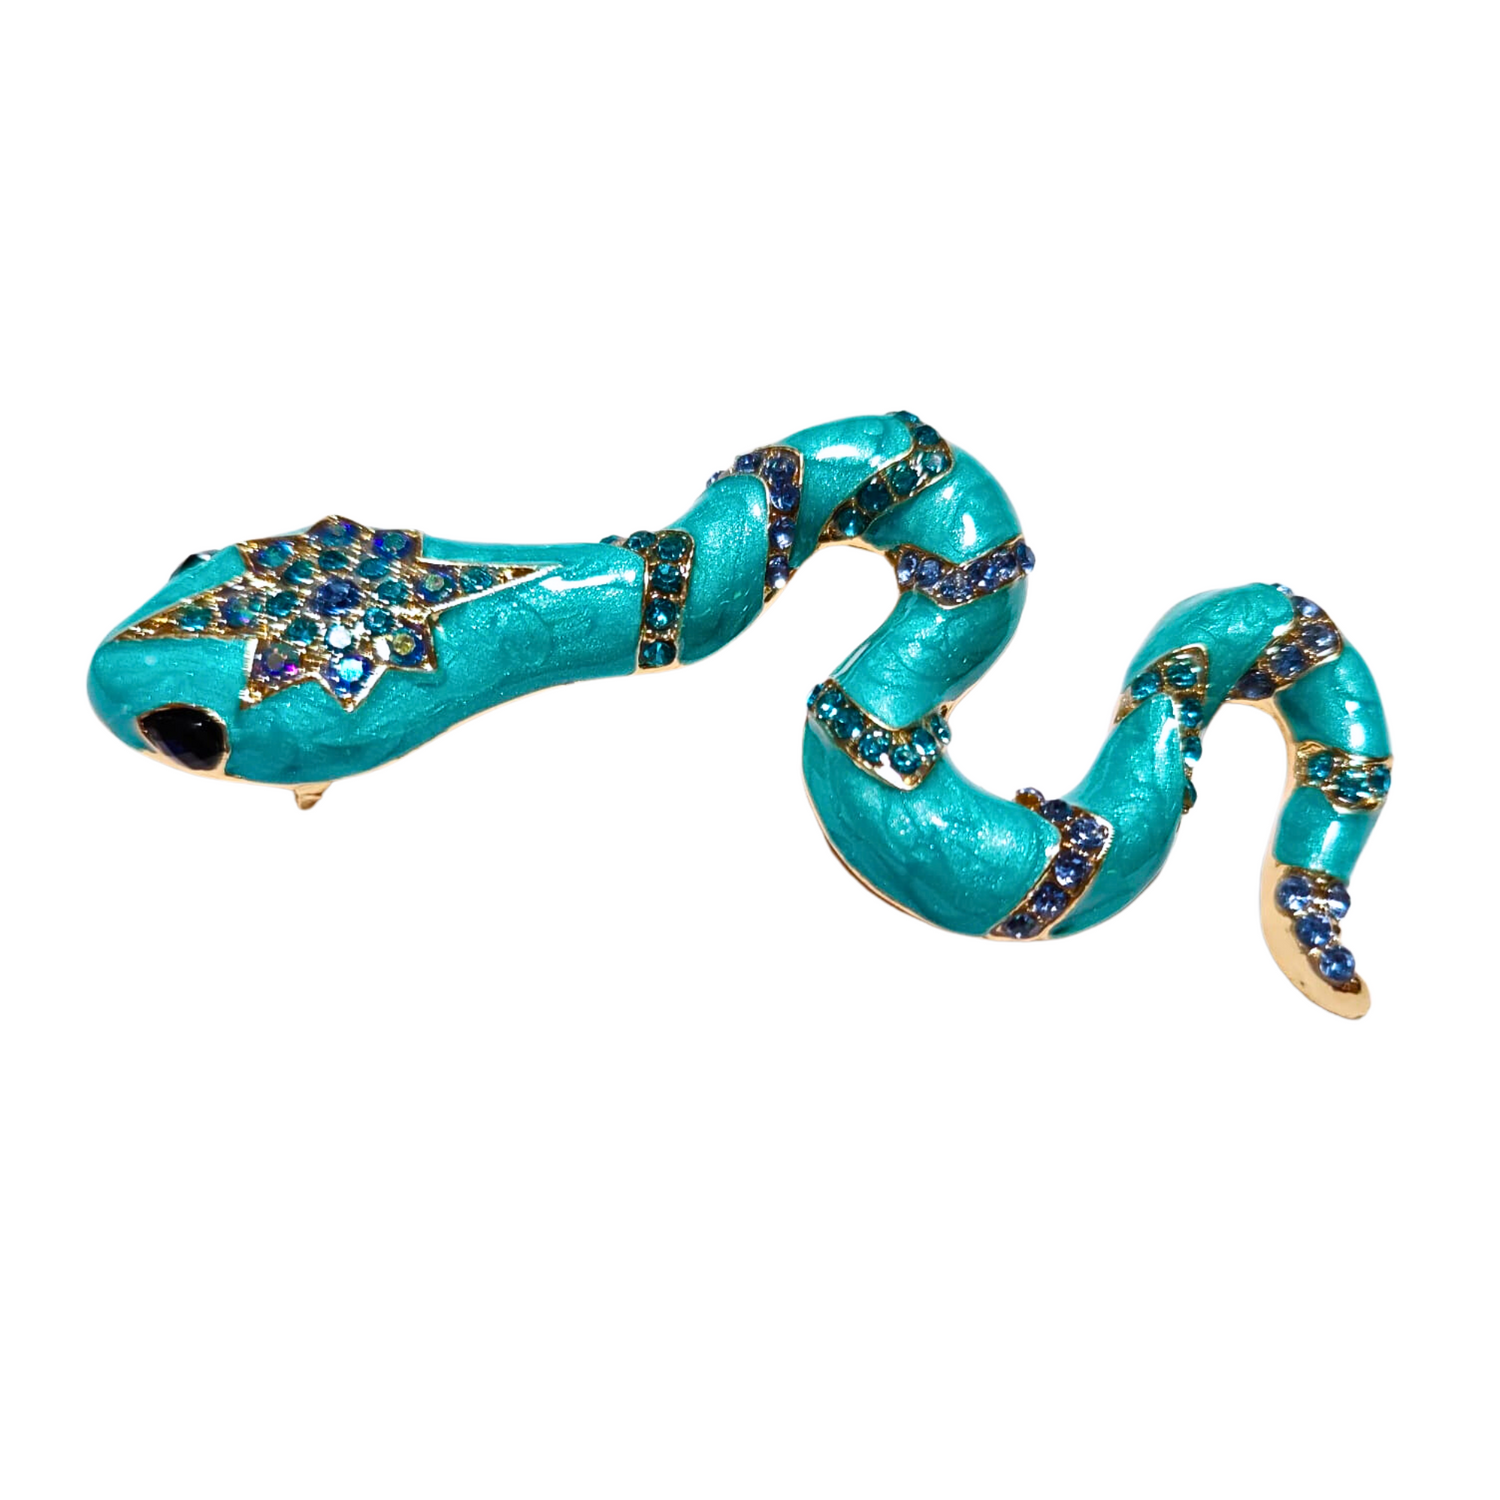 View 3: Teal Snake With Jewels Lapel Pin